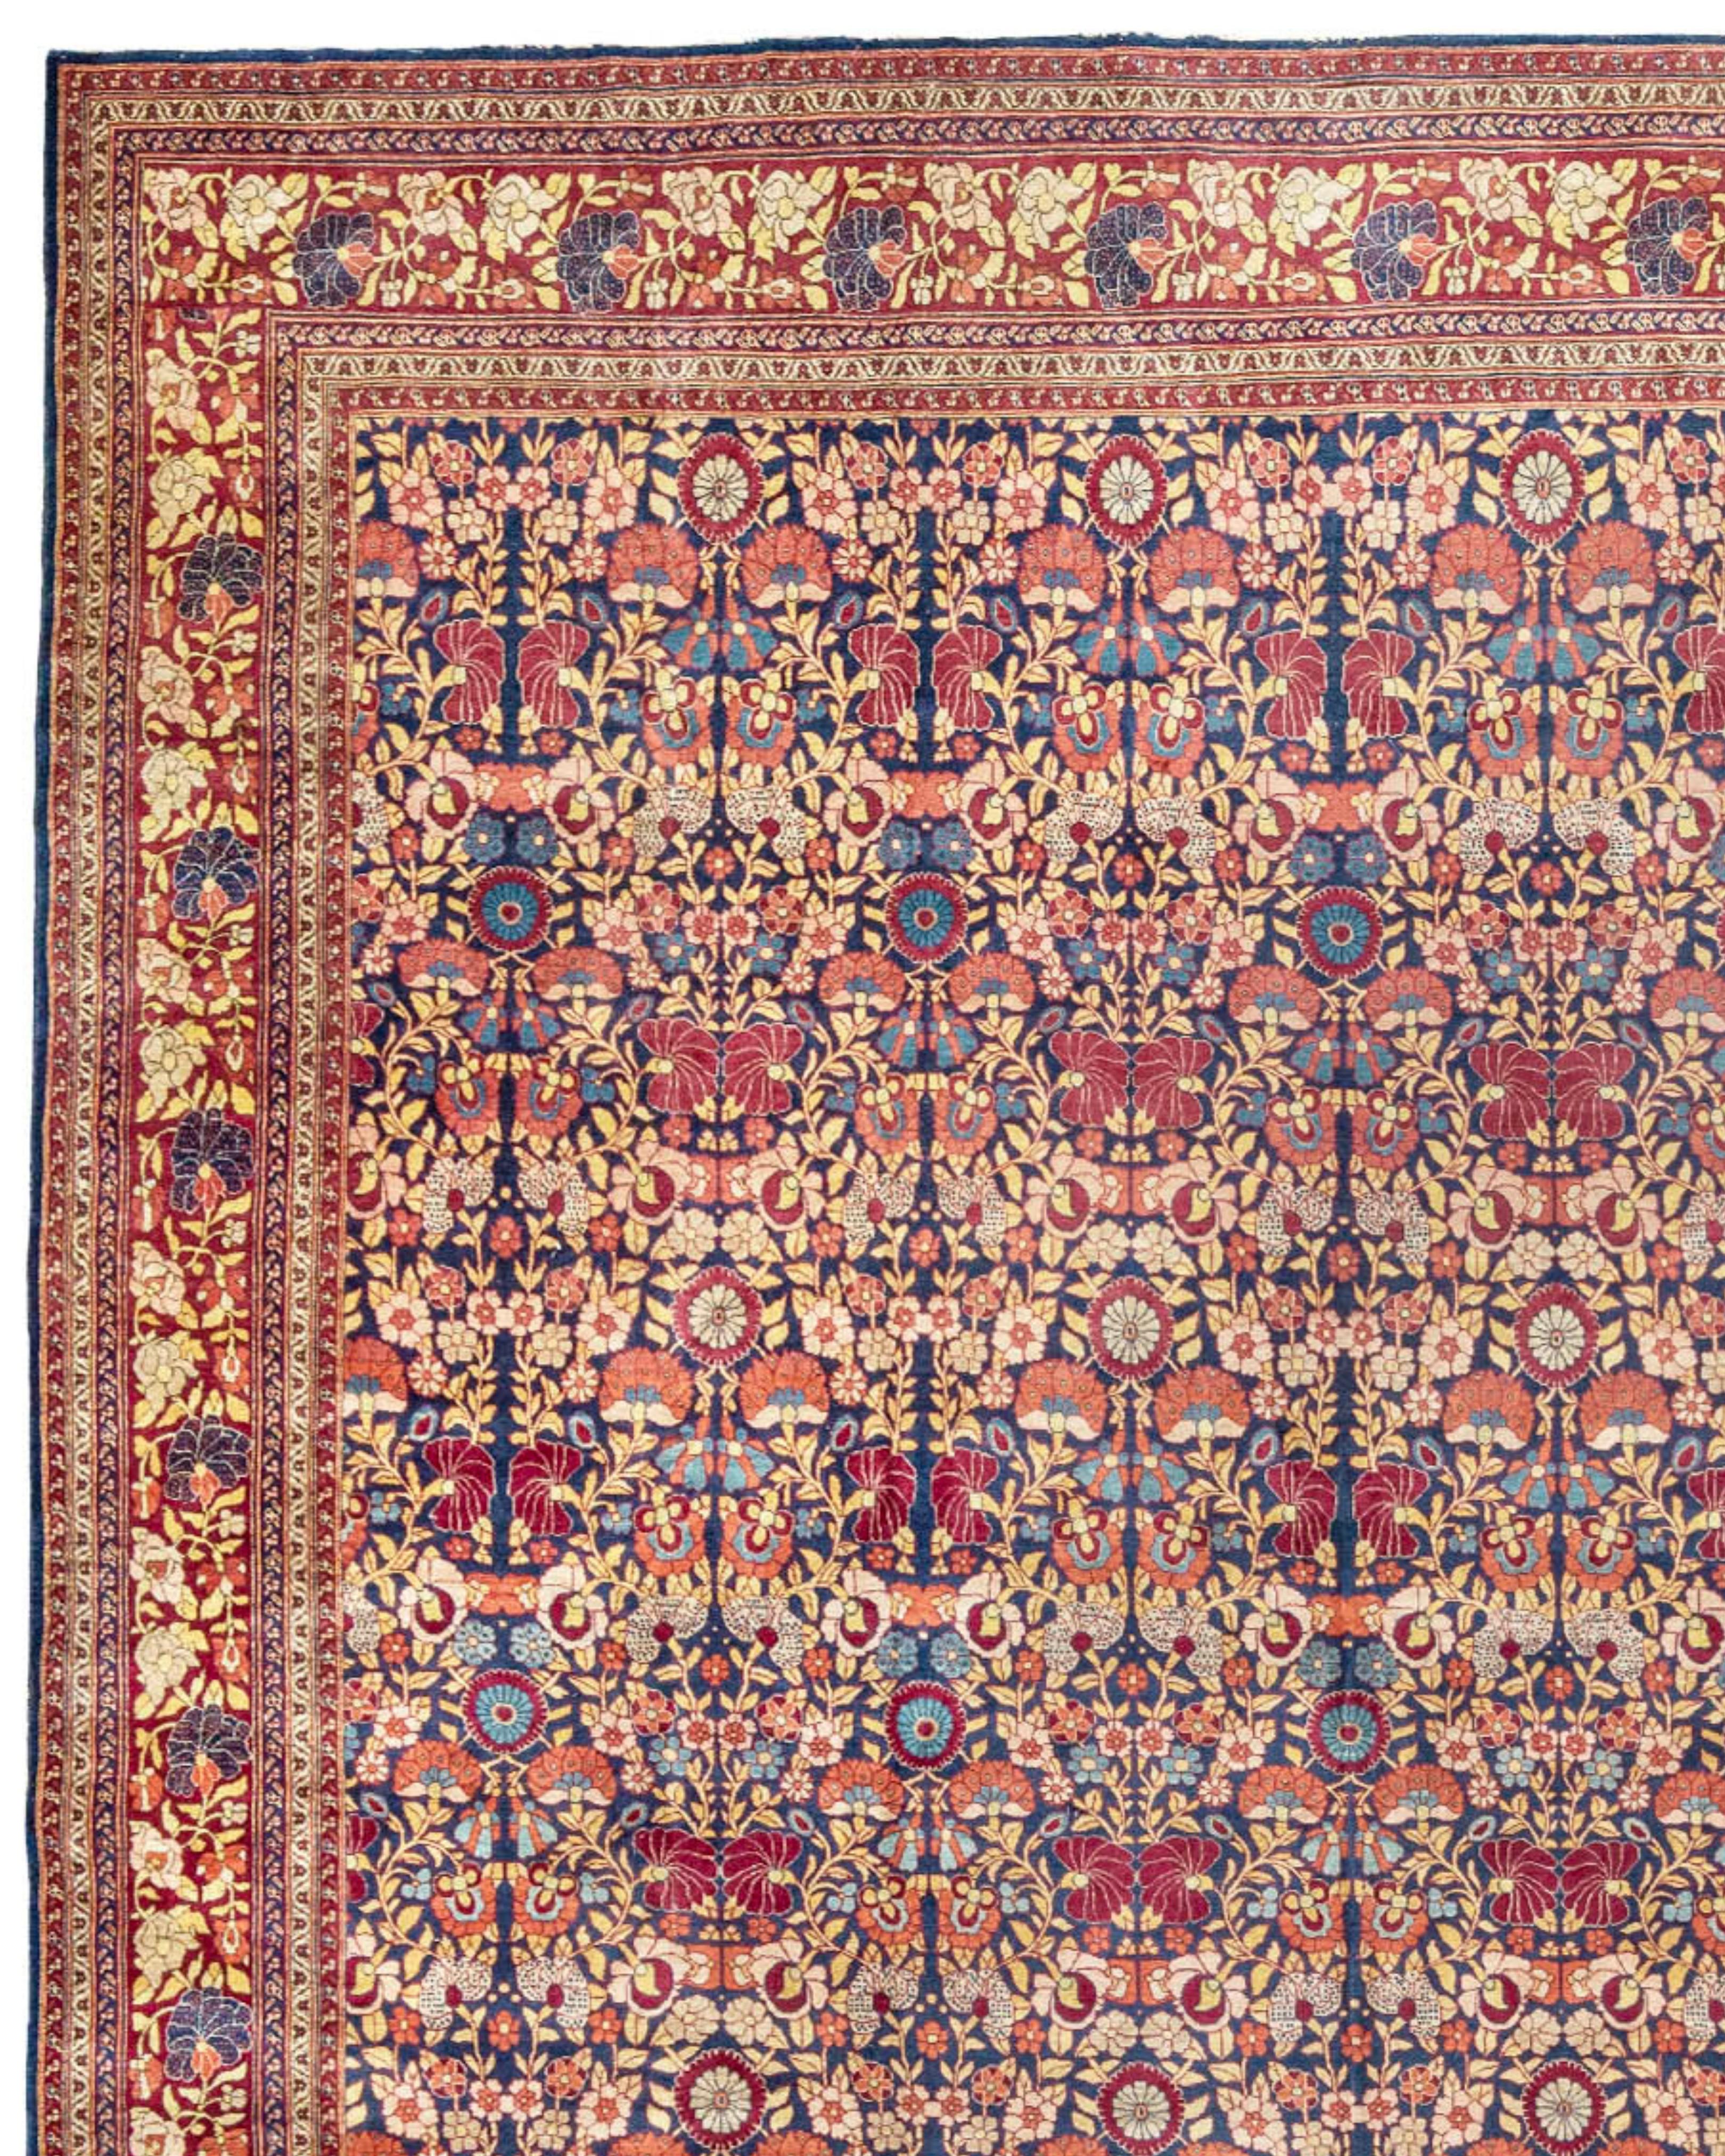 Antique Large Oversized Persian Mashad Carpet, c. 1900 In Excellent Condition For Sale In San Francisco, CA